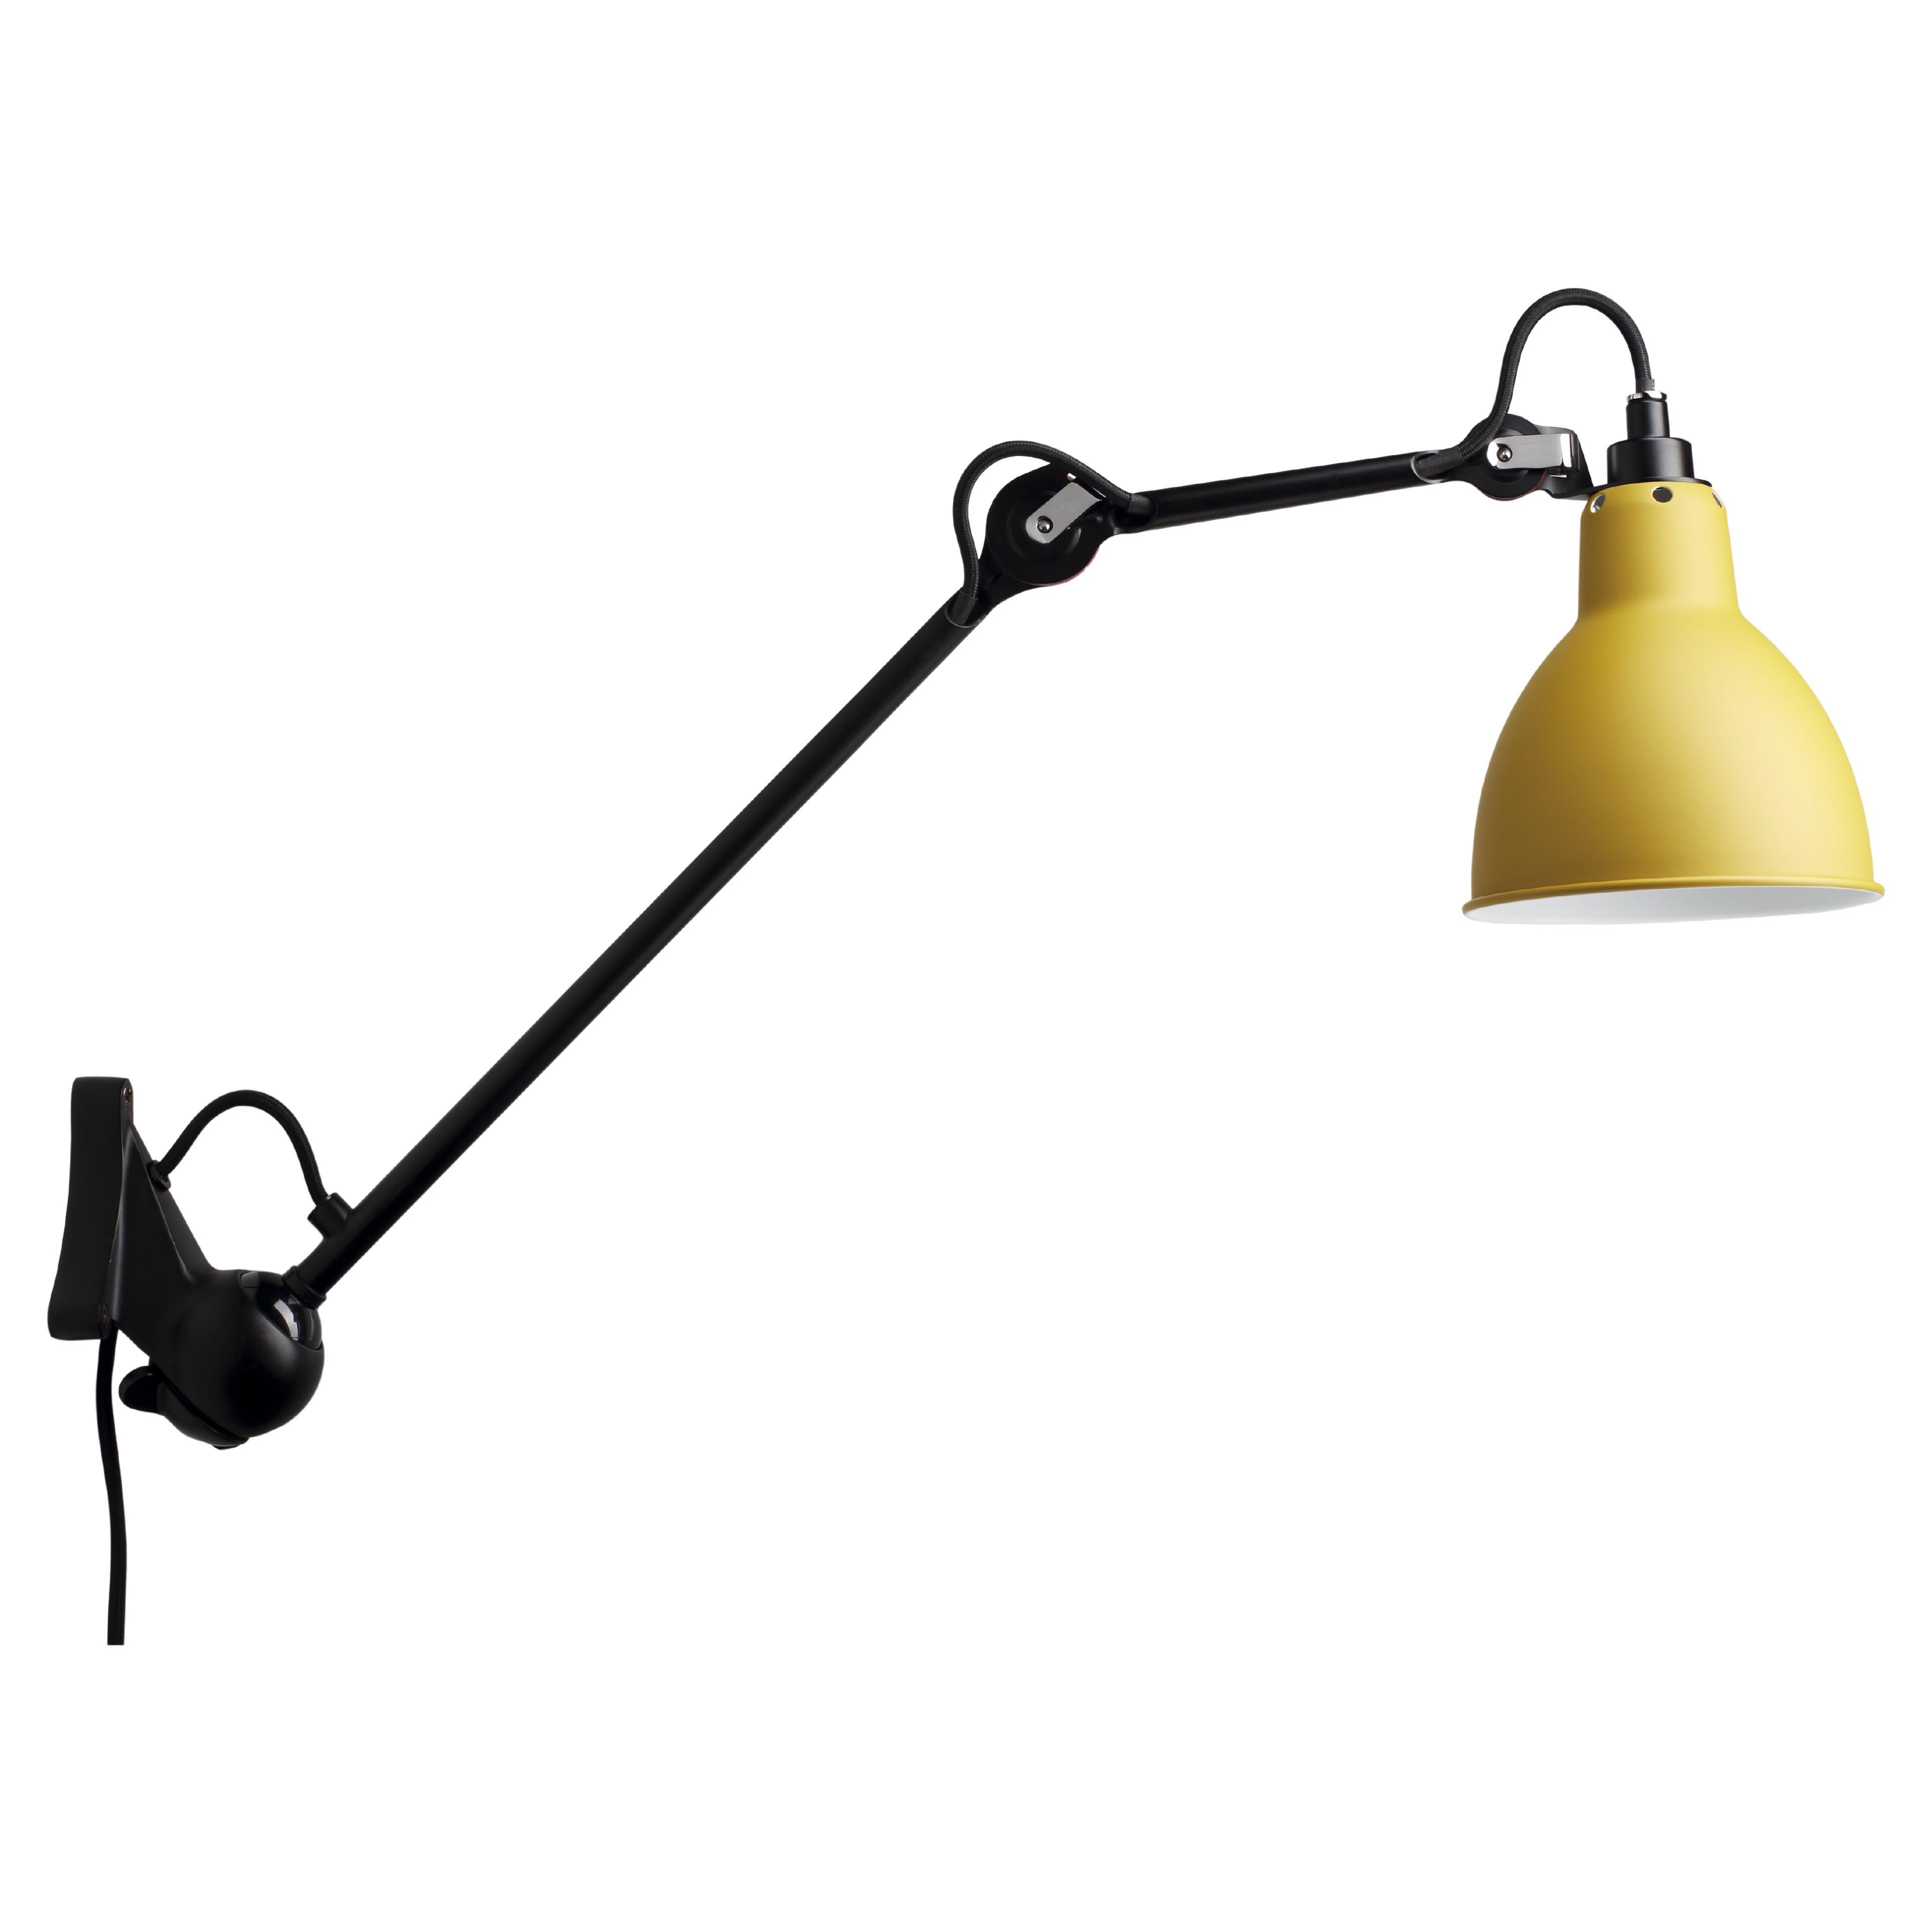 DCW Editions La Lampe Gras N°222 Wall Lamp in Black Arm and Yellow Shade For Sale